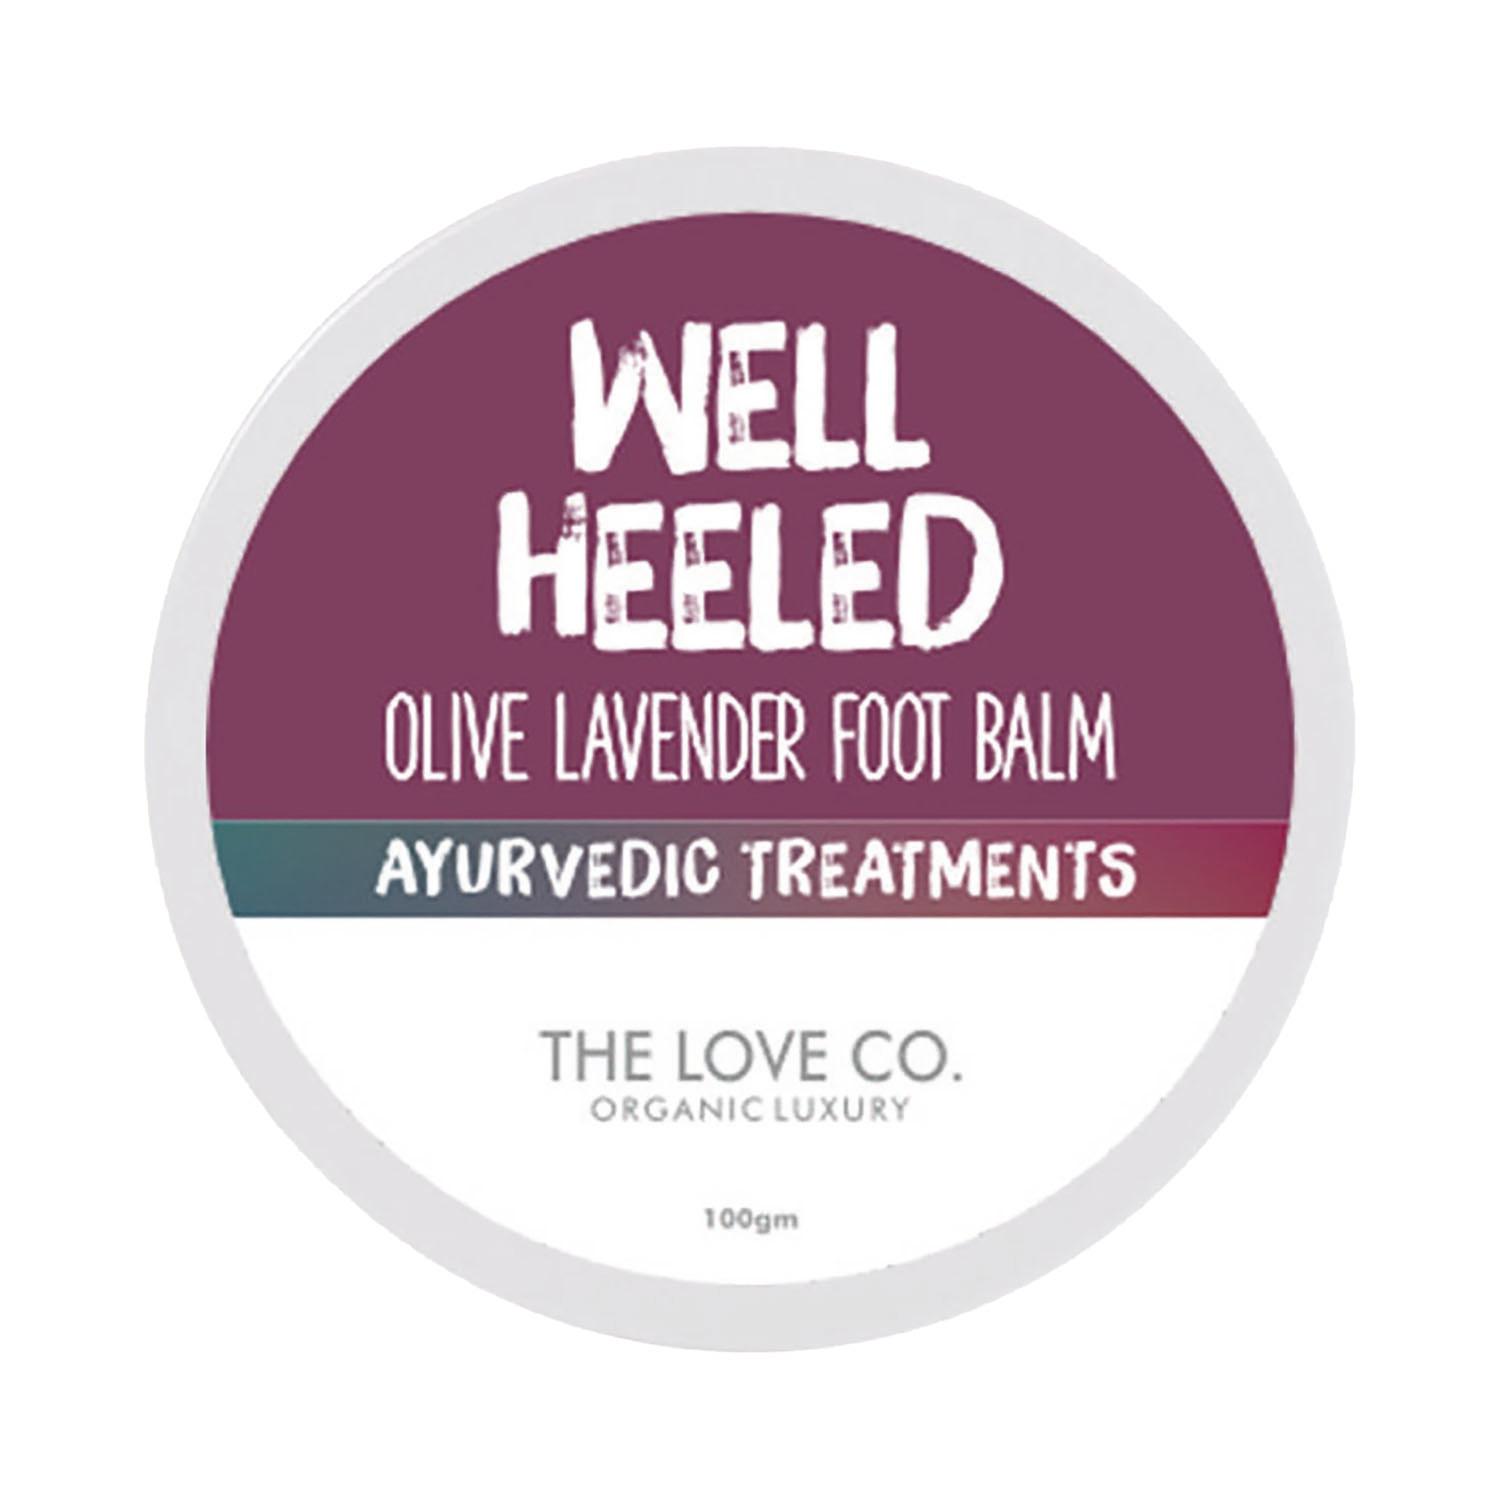 THE LOVE CO. | THE LOVE CO. Well Heeled Olive Lavender Foot Balm (100g)